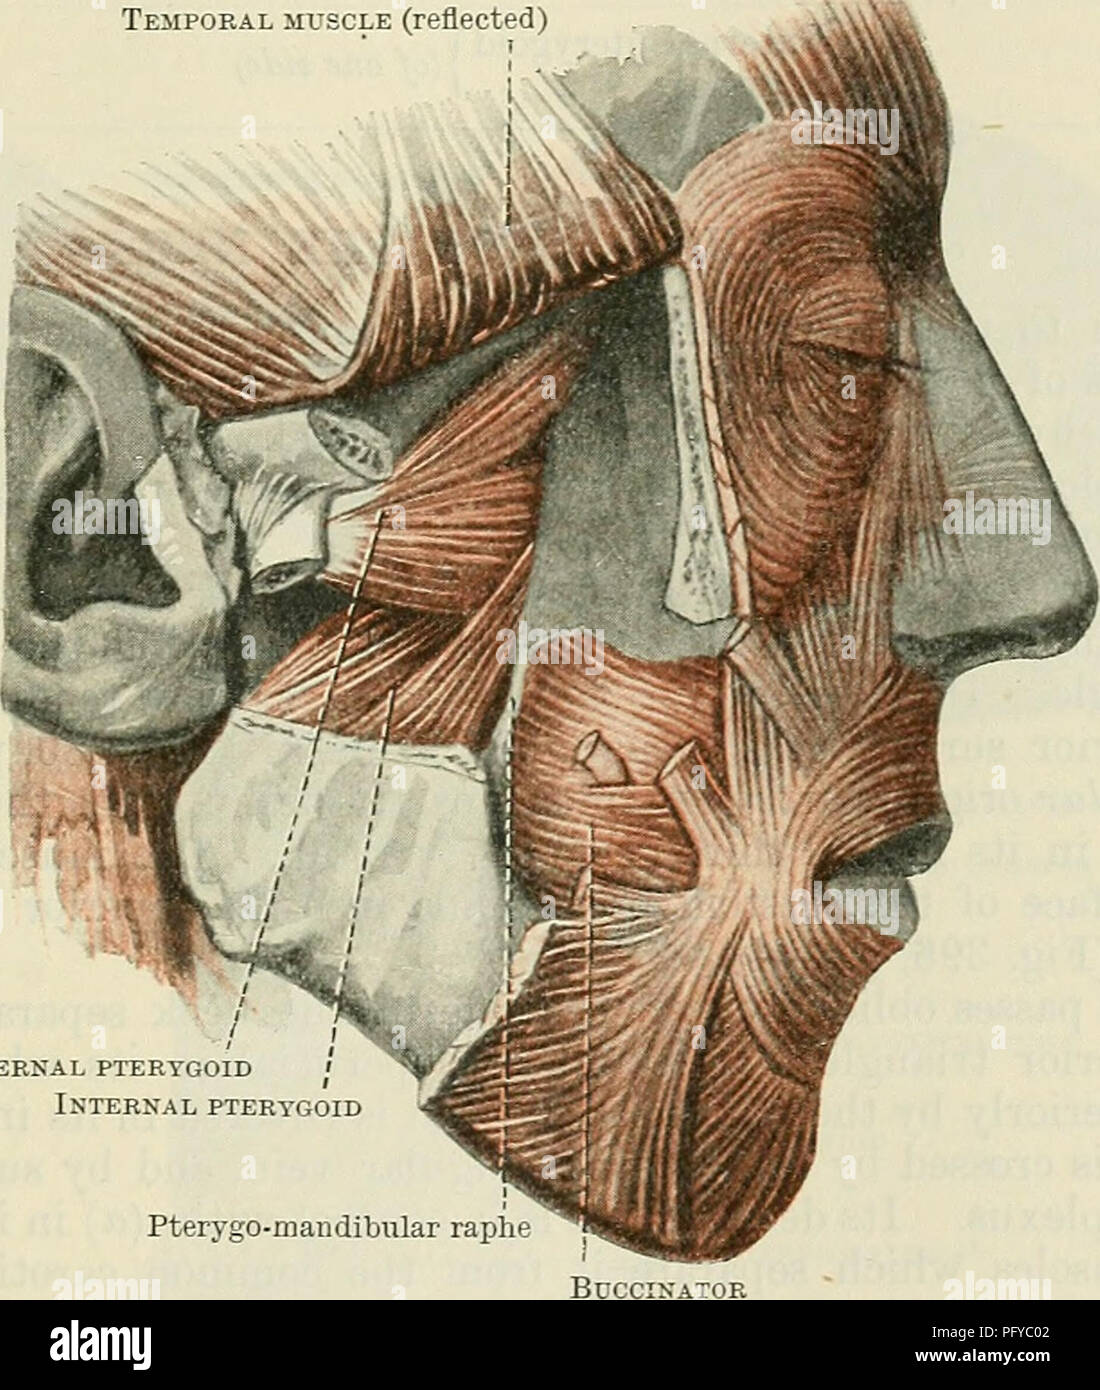 . Cunningham's Text-book of anatomy. Anatomy. MUSCLES OF MASTICATION. 457 fovea pterygoidea on the anterior aspect of the neck of the mandible (Figs. 403 and 404, p. 455), and (2) the articular disc and capsule of the mandibular articulation. This muscle is covered by the insertion of the temporal muscle and the coronoid process of the mandible, and is usually crossed by the internal maxillary artery. It conceals the mandibular branch of the trigeminal nerve, and the pterygoid origin of the internal pterygoid muscle. M. Pterygoideus Internus.—The internal pterygoid muscle, placed beneath the e Stock Photo